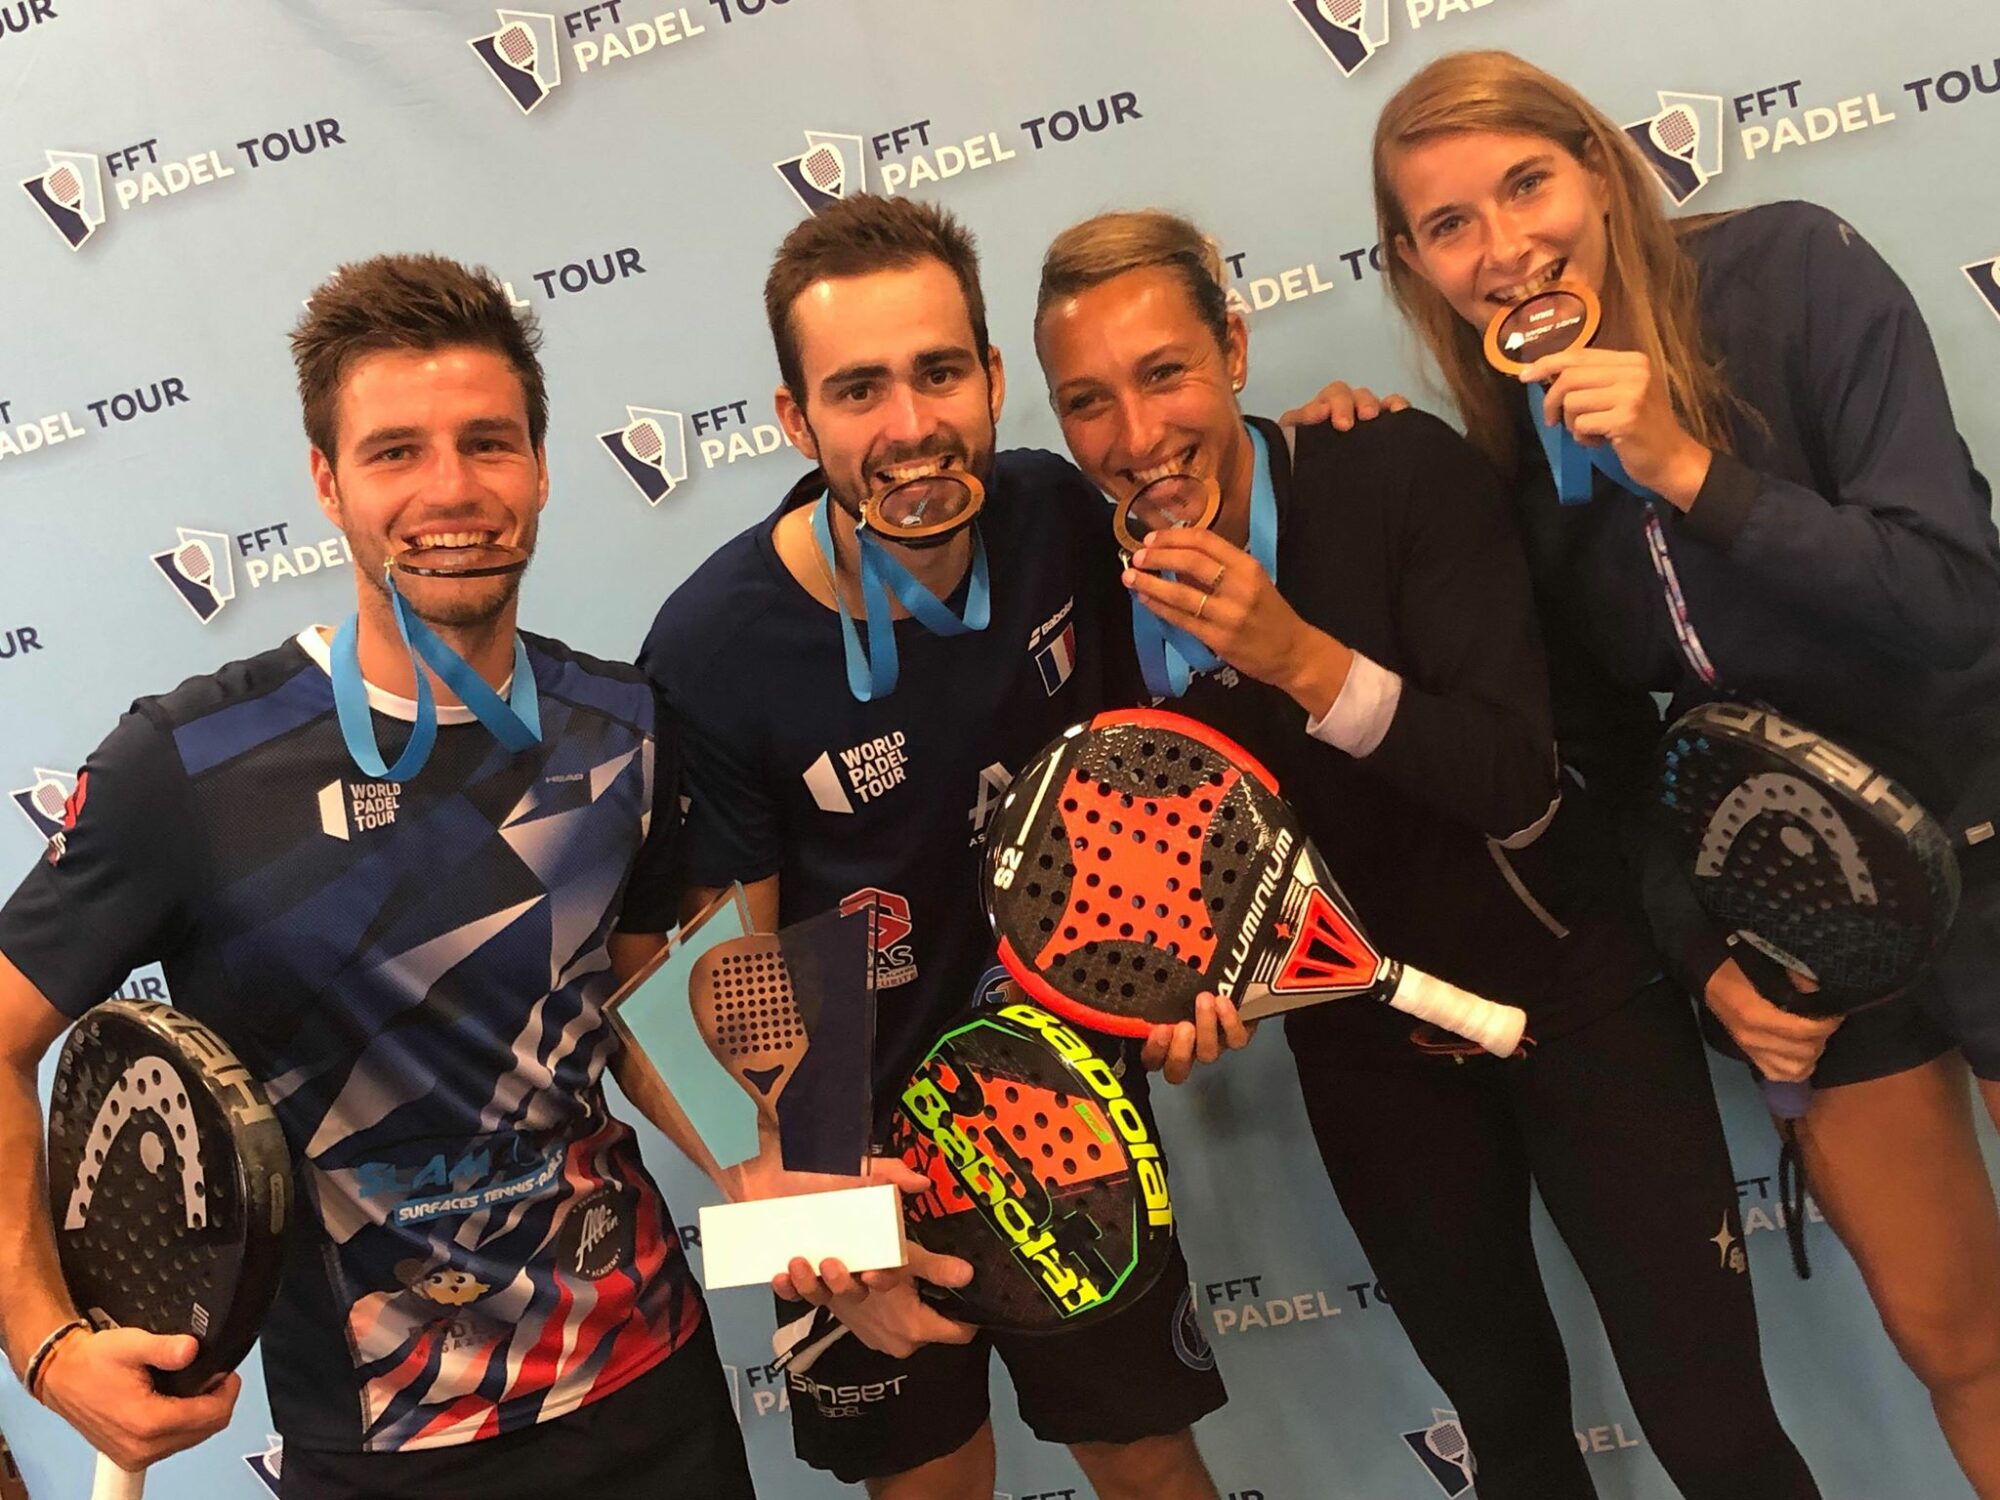 Collombon / Ginier and Bergeron / Blanqué have struck again at the FFT Padel Tour